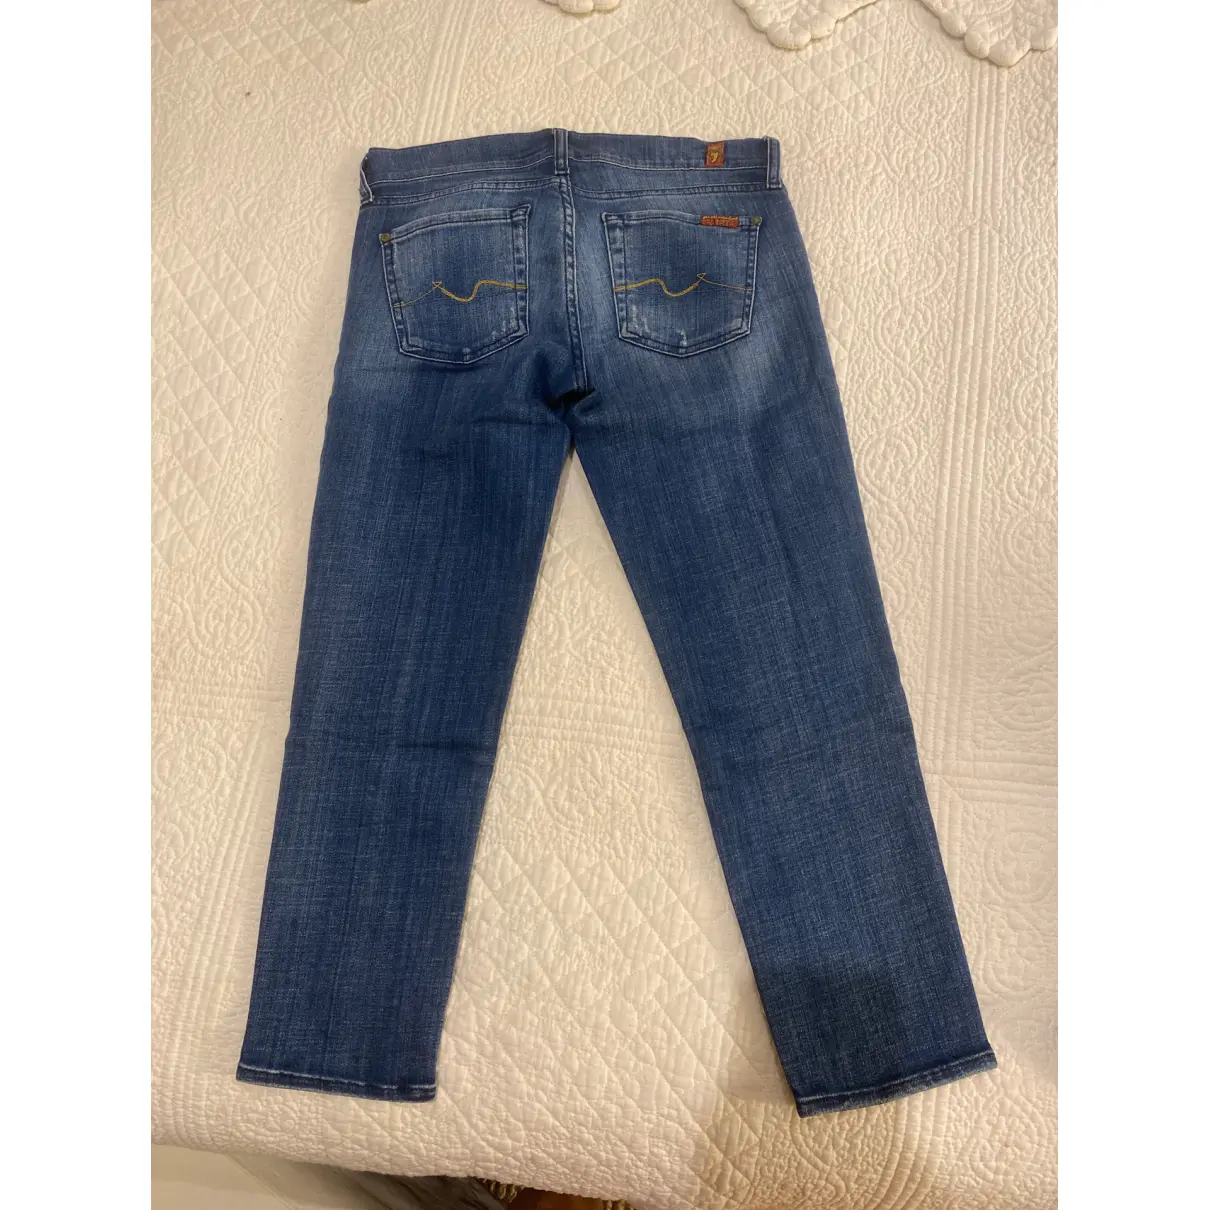 Buy 7 For All Mankind Short jeans online